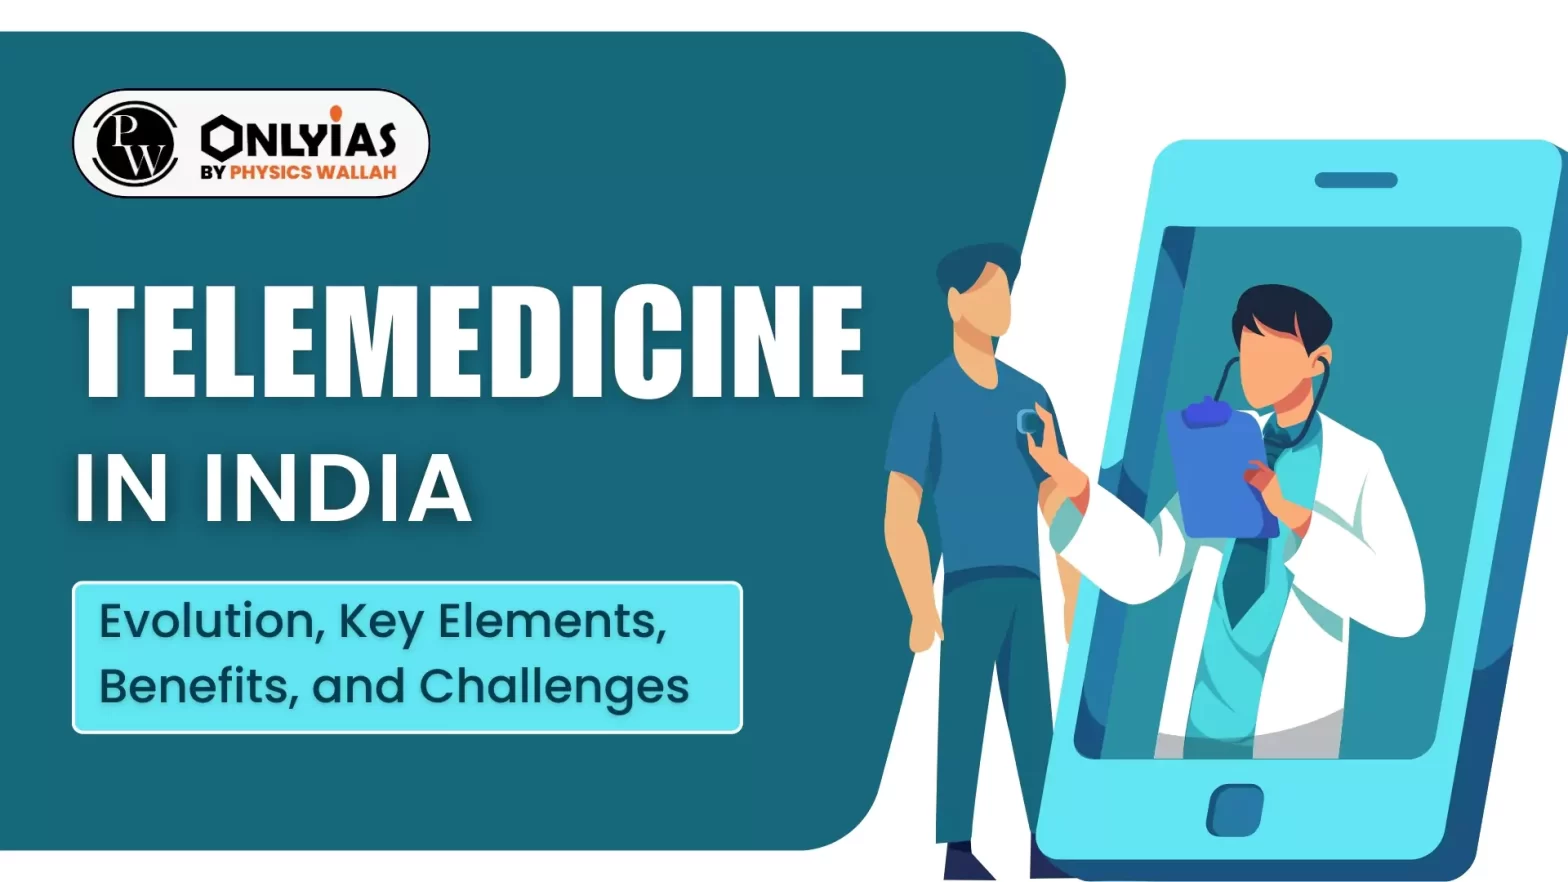 Telemedicine in India: Evolution, Key Elements, Benefits, and Challenges